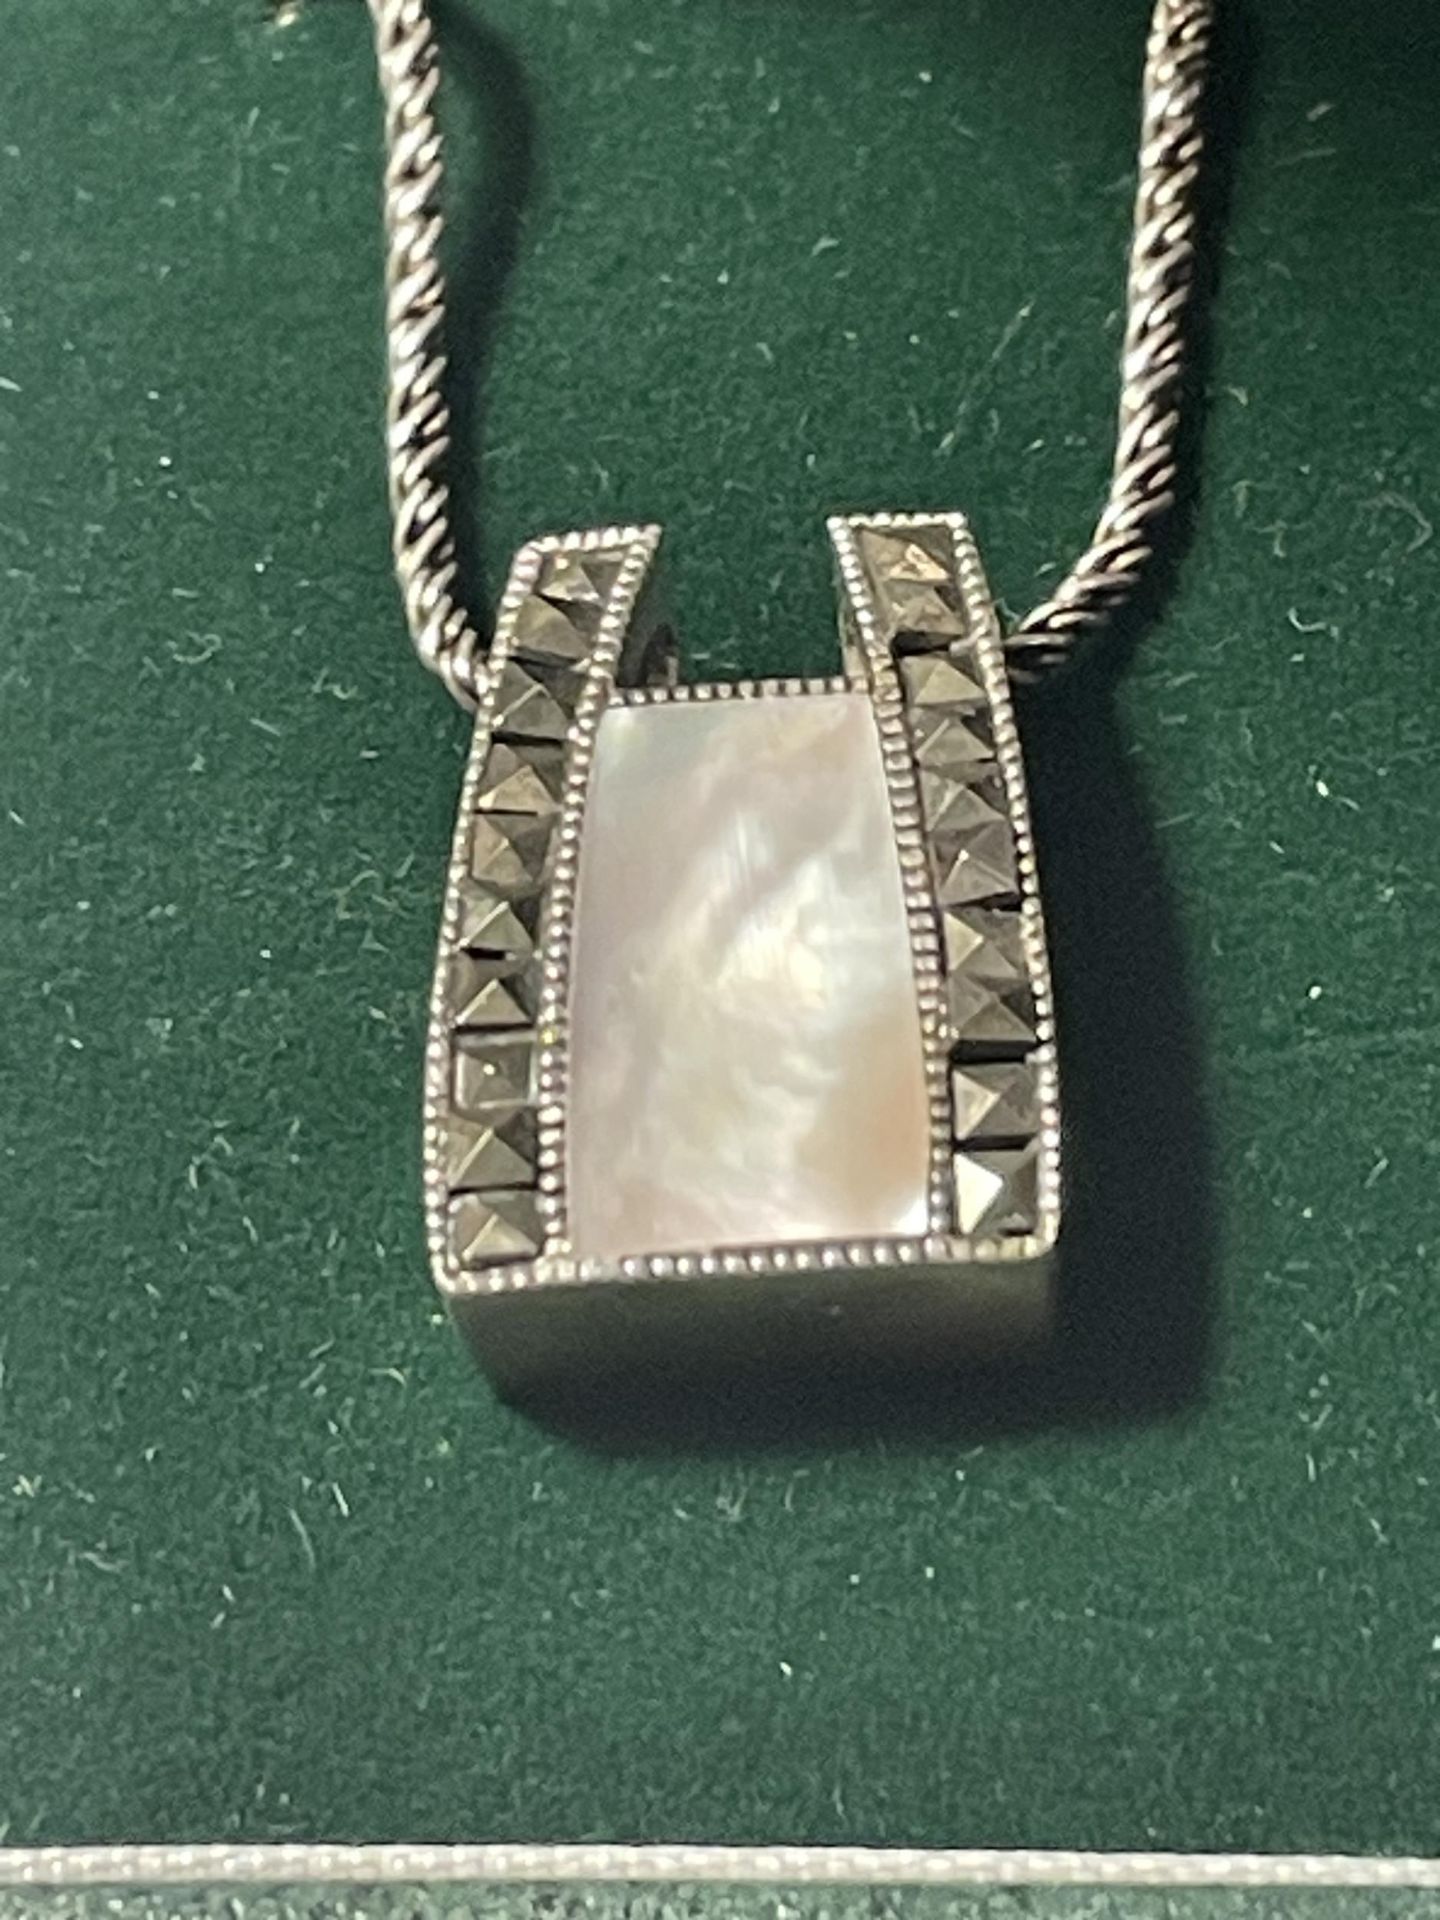 A SILVER NECKLACE WITH A MOTHER OF PEARL AND MARCASITE DECO STYLE PENDANT IN A PRESENTATION BOX - Image 2 of 3